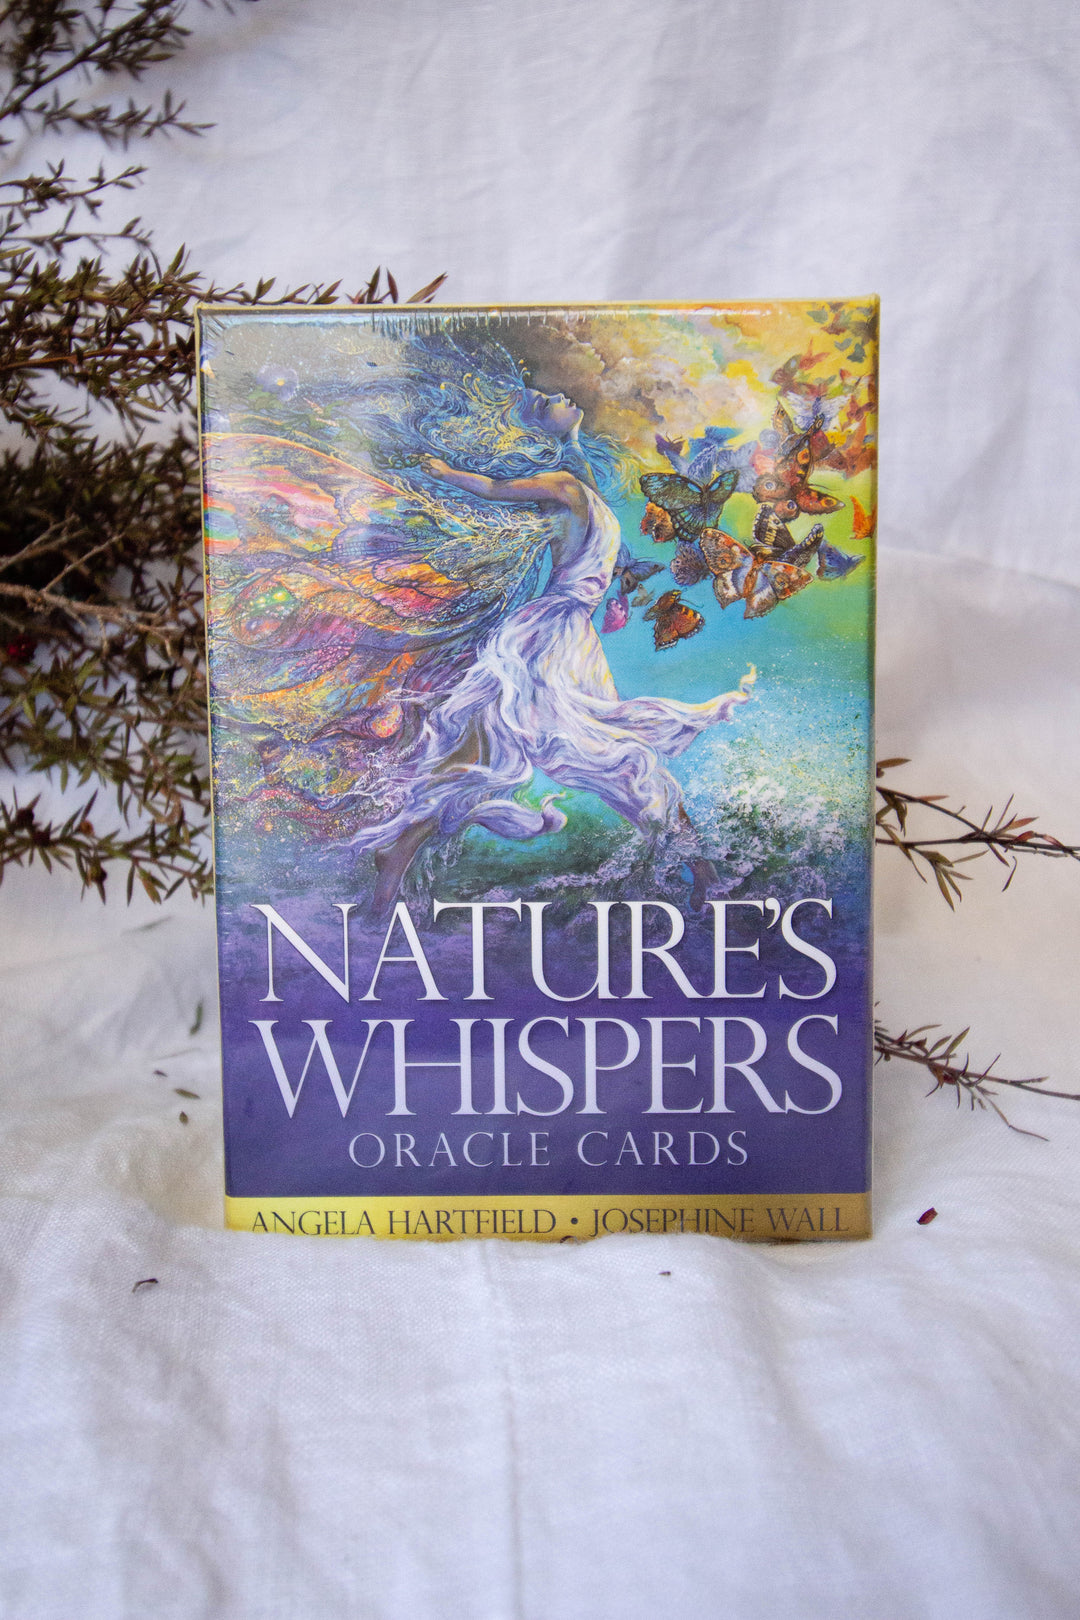 NATURES WHISPERS ORACLE CARDS